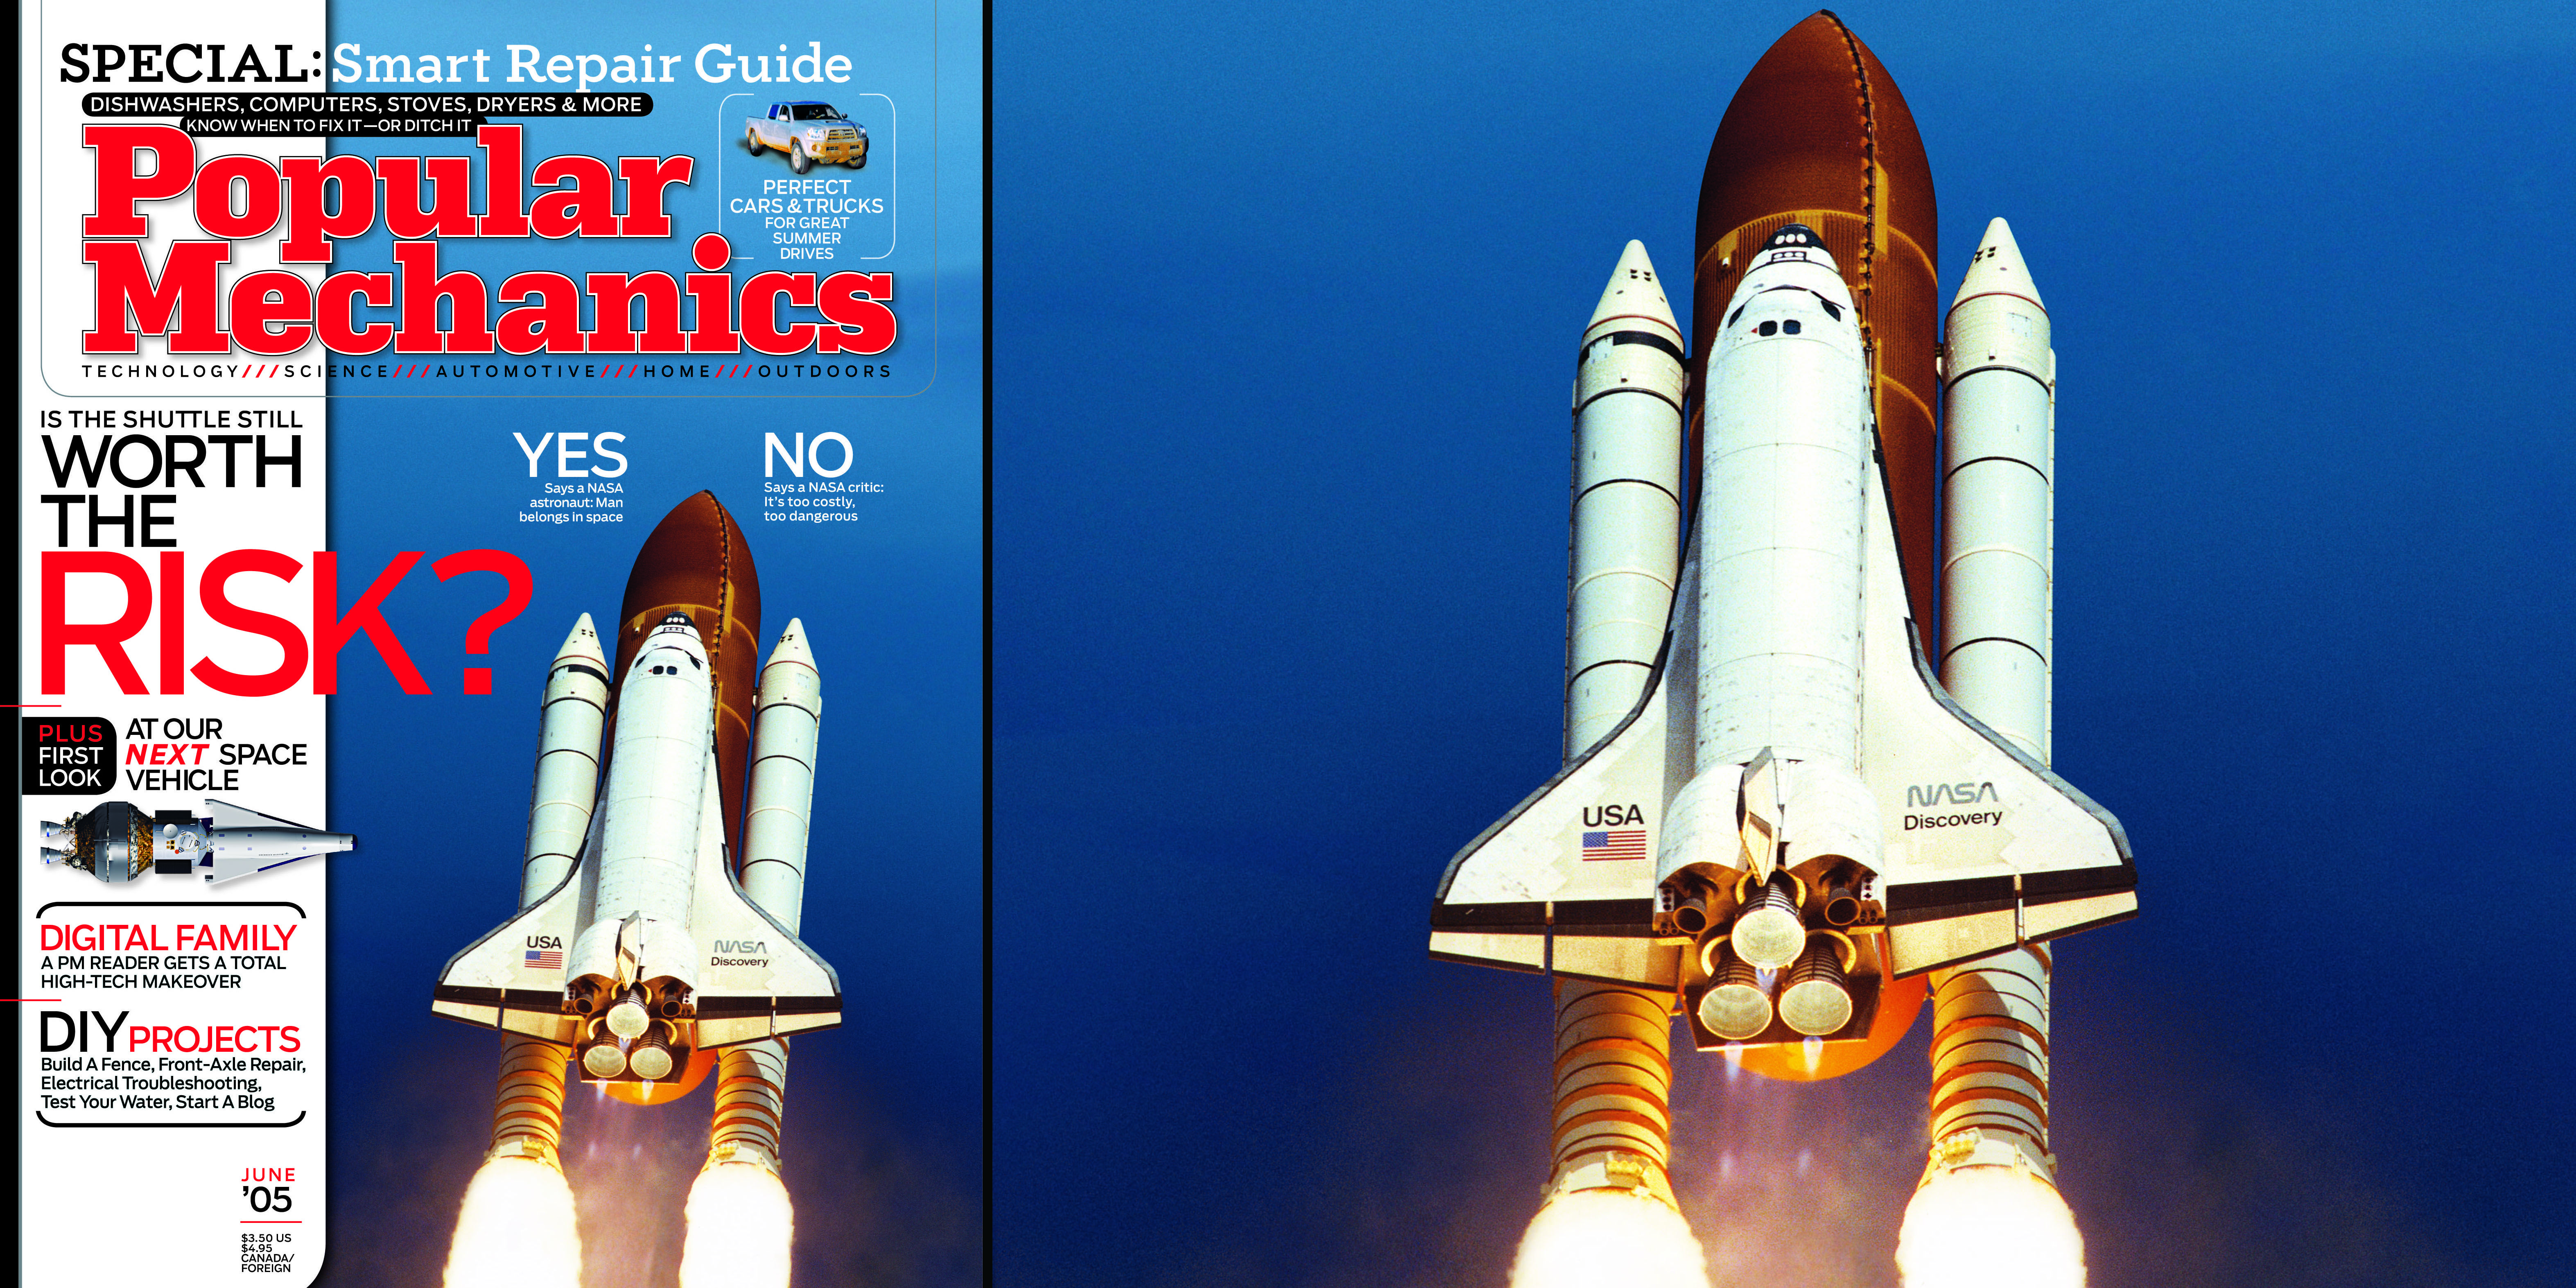 The Pros and Cons of NASA's Space Shuttle